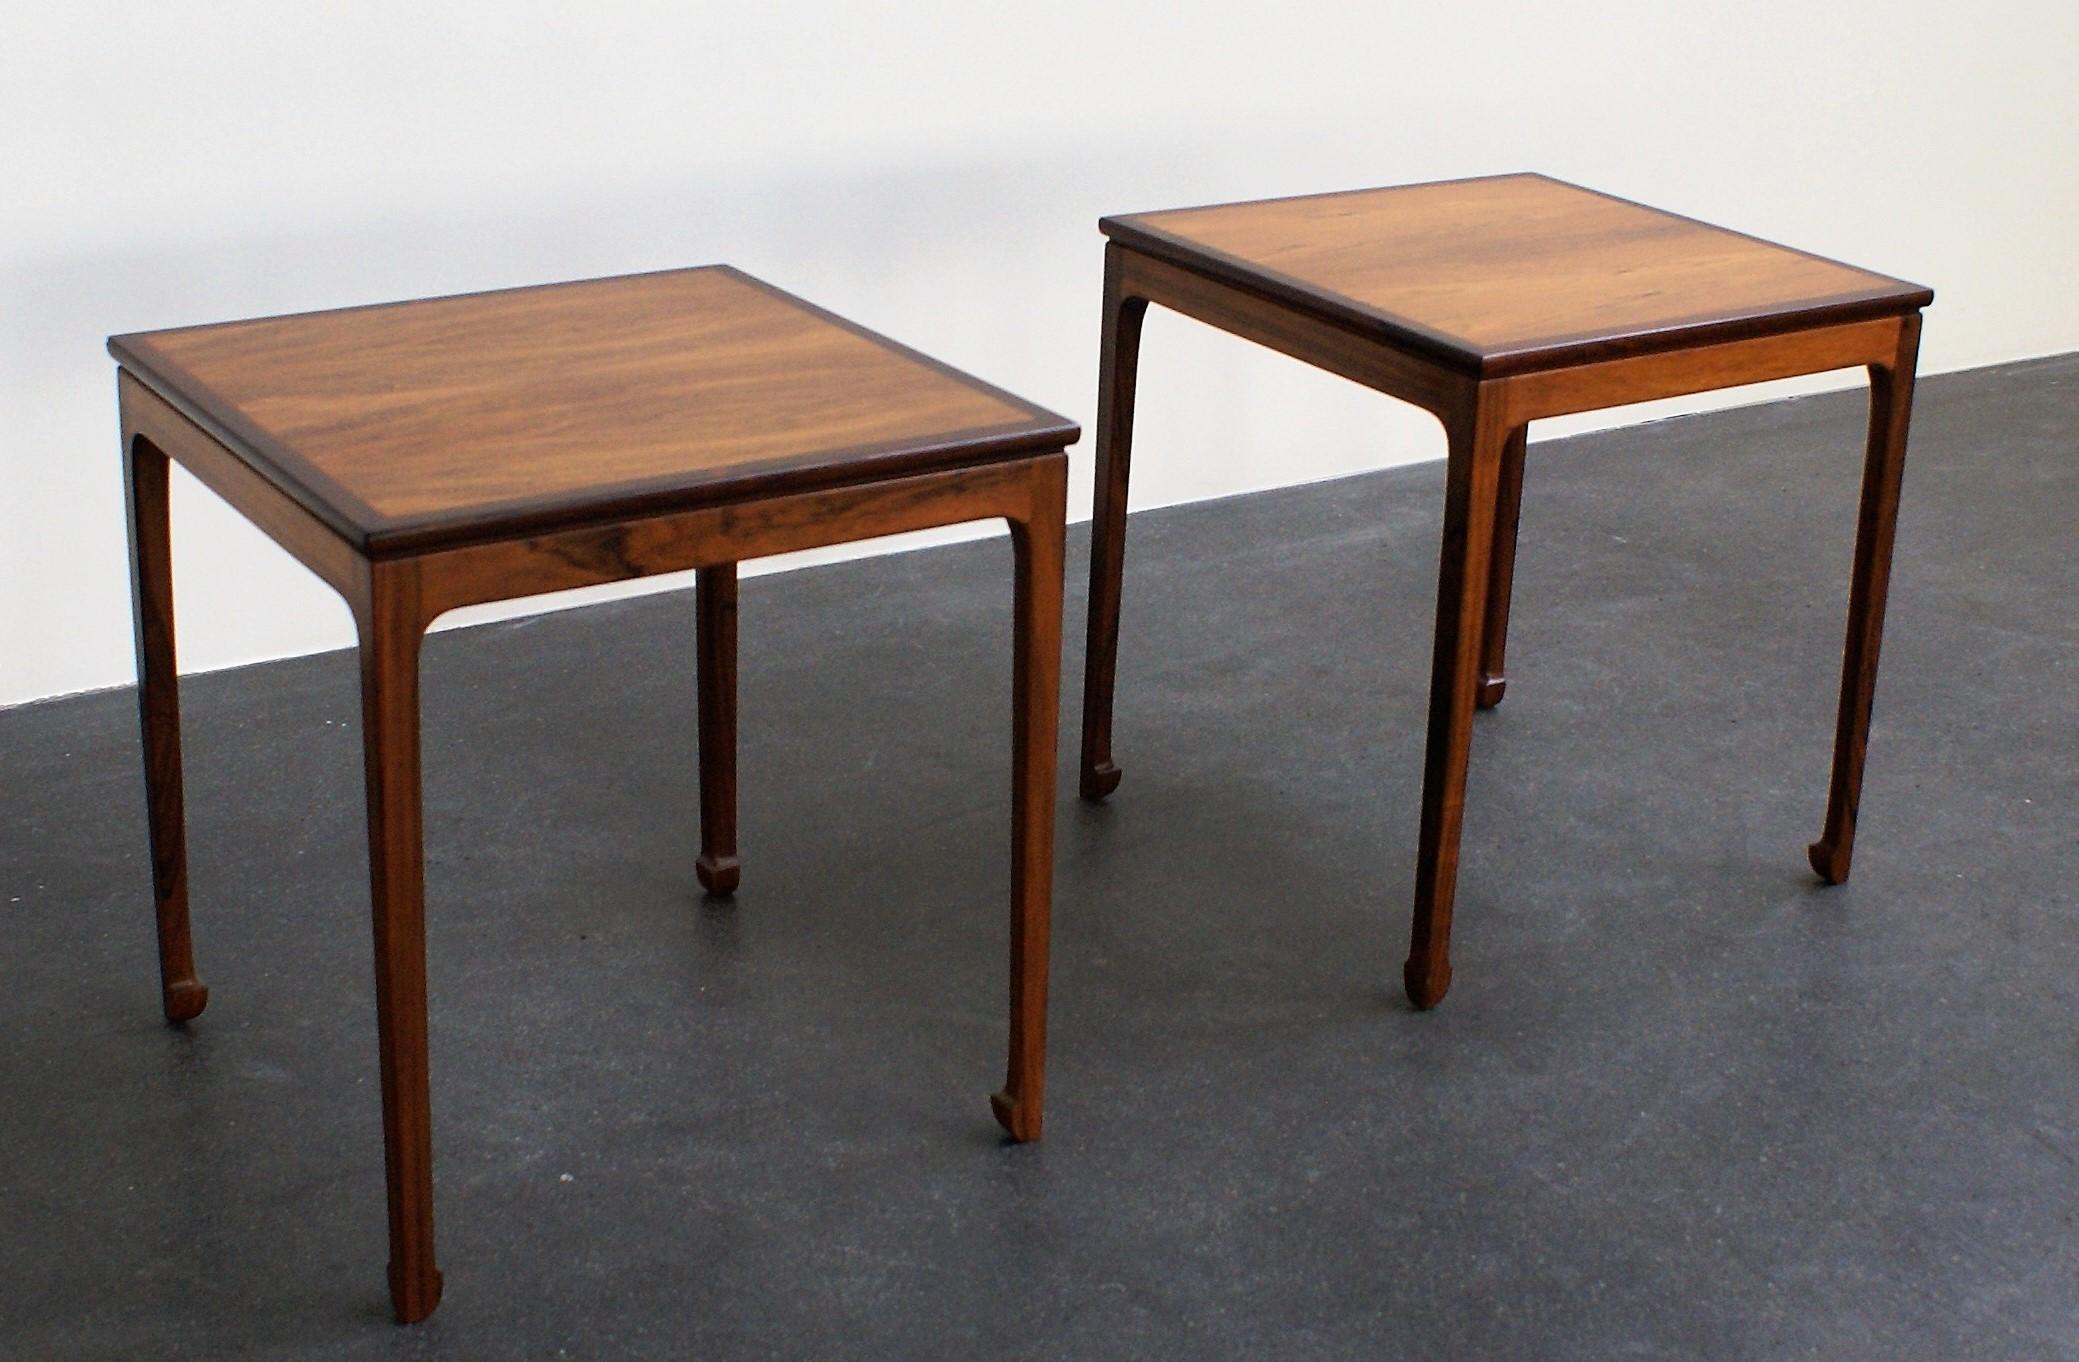 Ole Wanscher Pair of Side Tables in Brazilian Rosewood for A. J. Iversen, 1957 For Sale 5